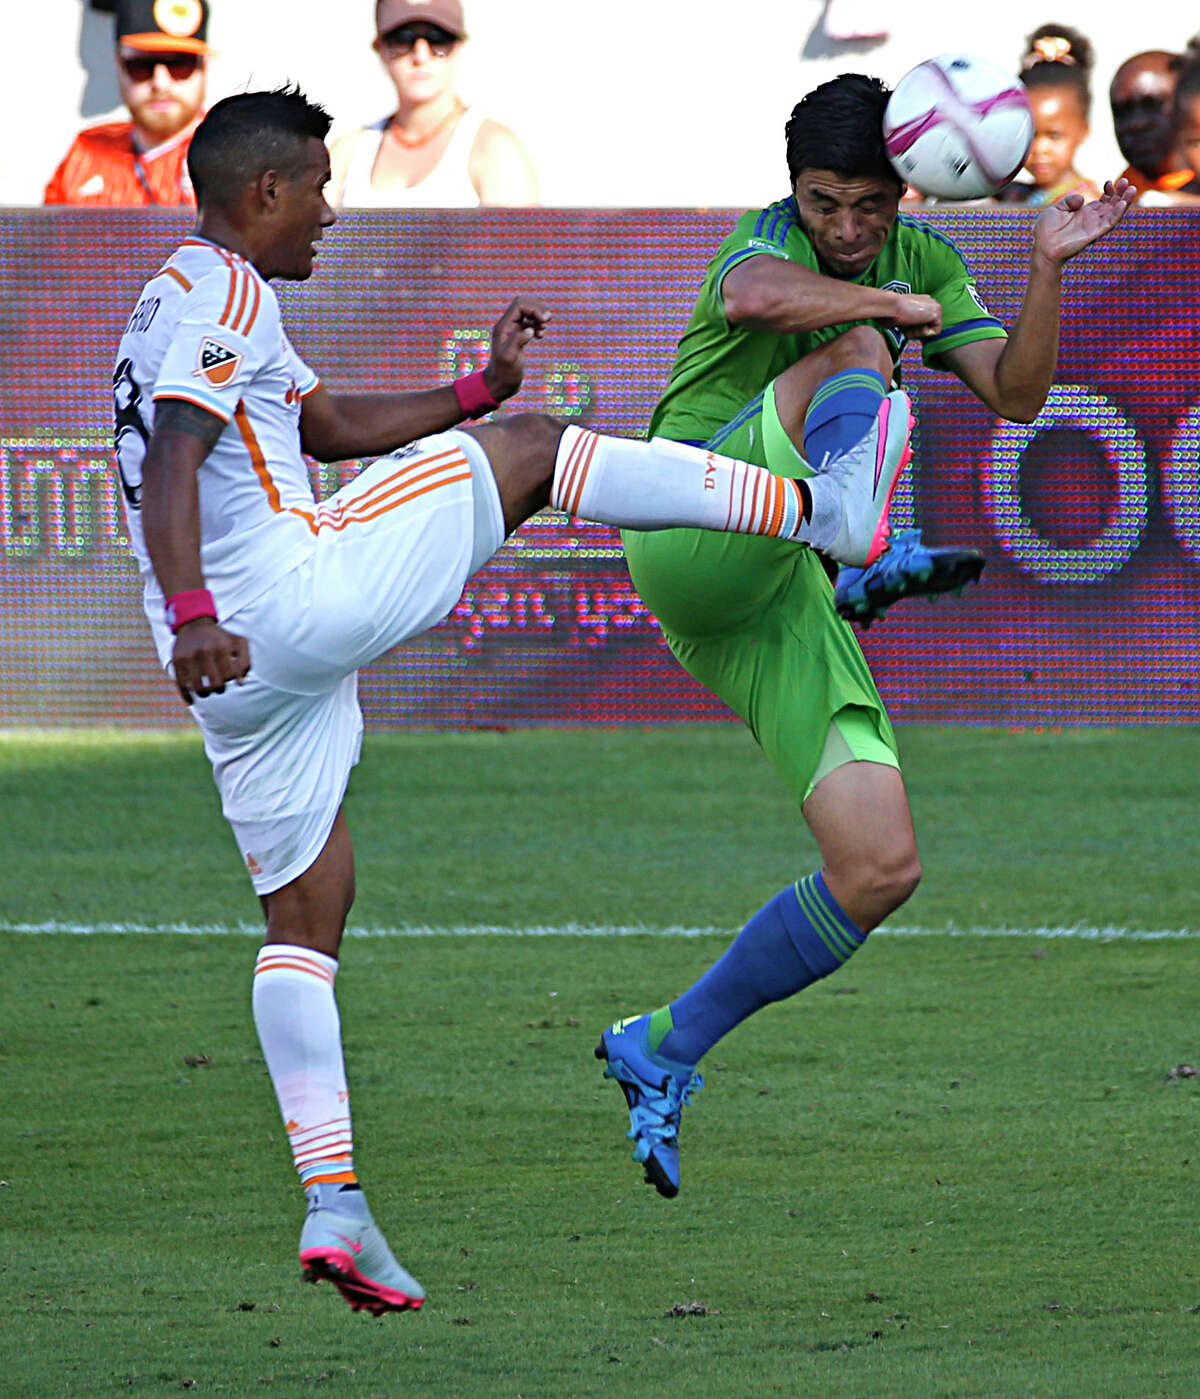 The cleats get dangerously high as the Dynamo's Luis Garrido, left, and the Sounders' Gonzalo Pineda clash.